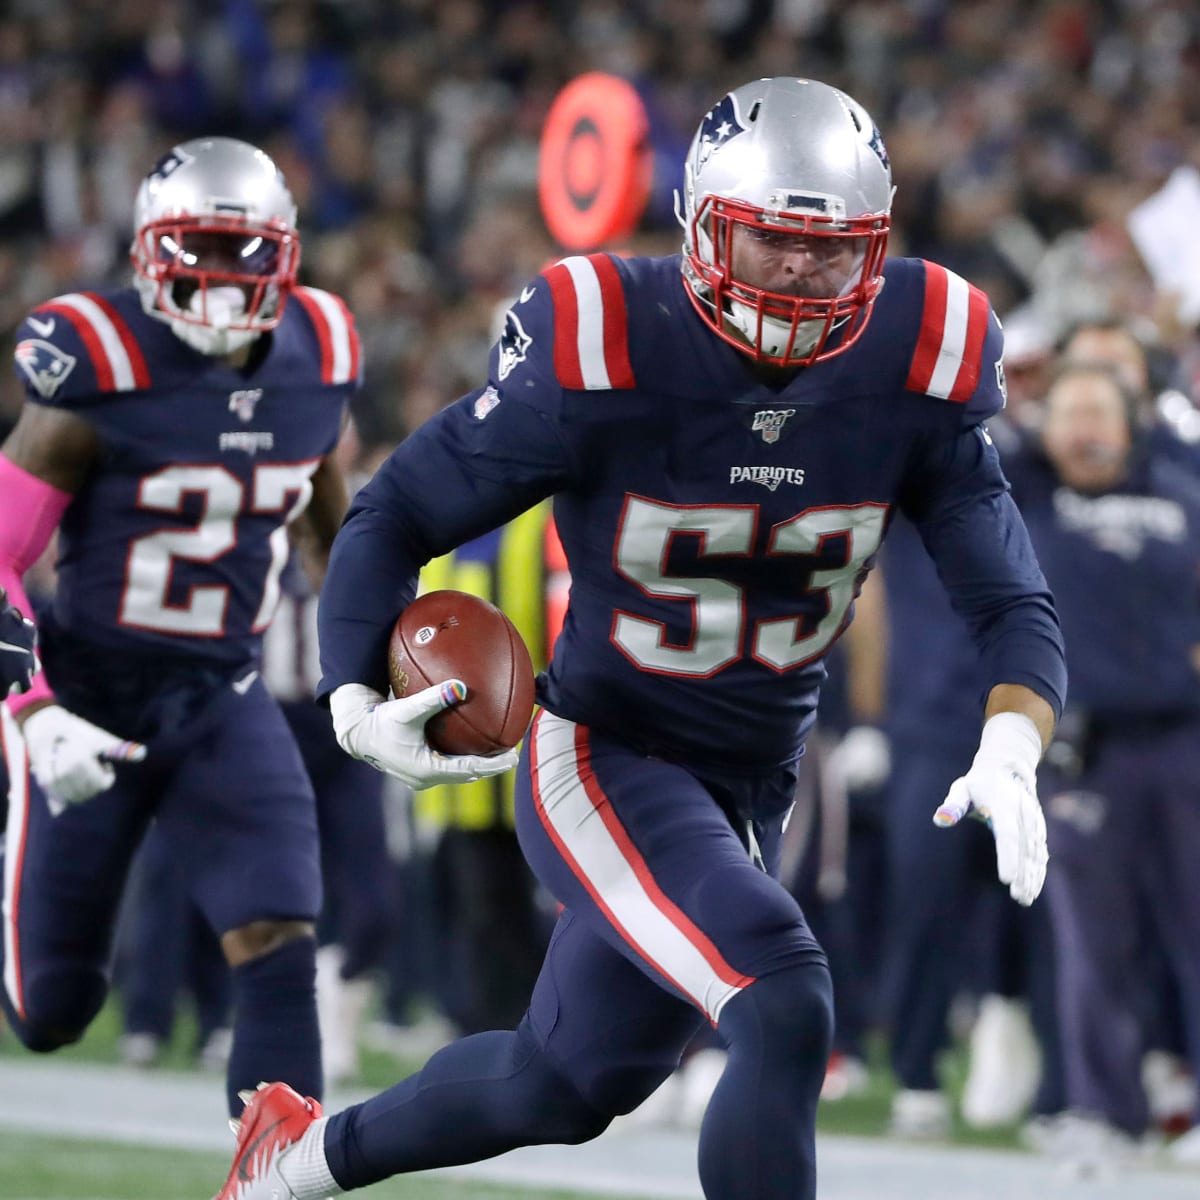 5 takeaways from the Patriots' dominant win over the Lions